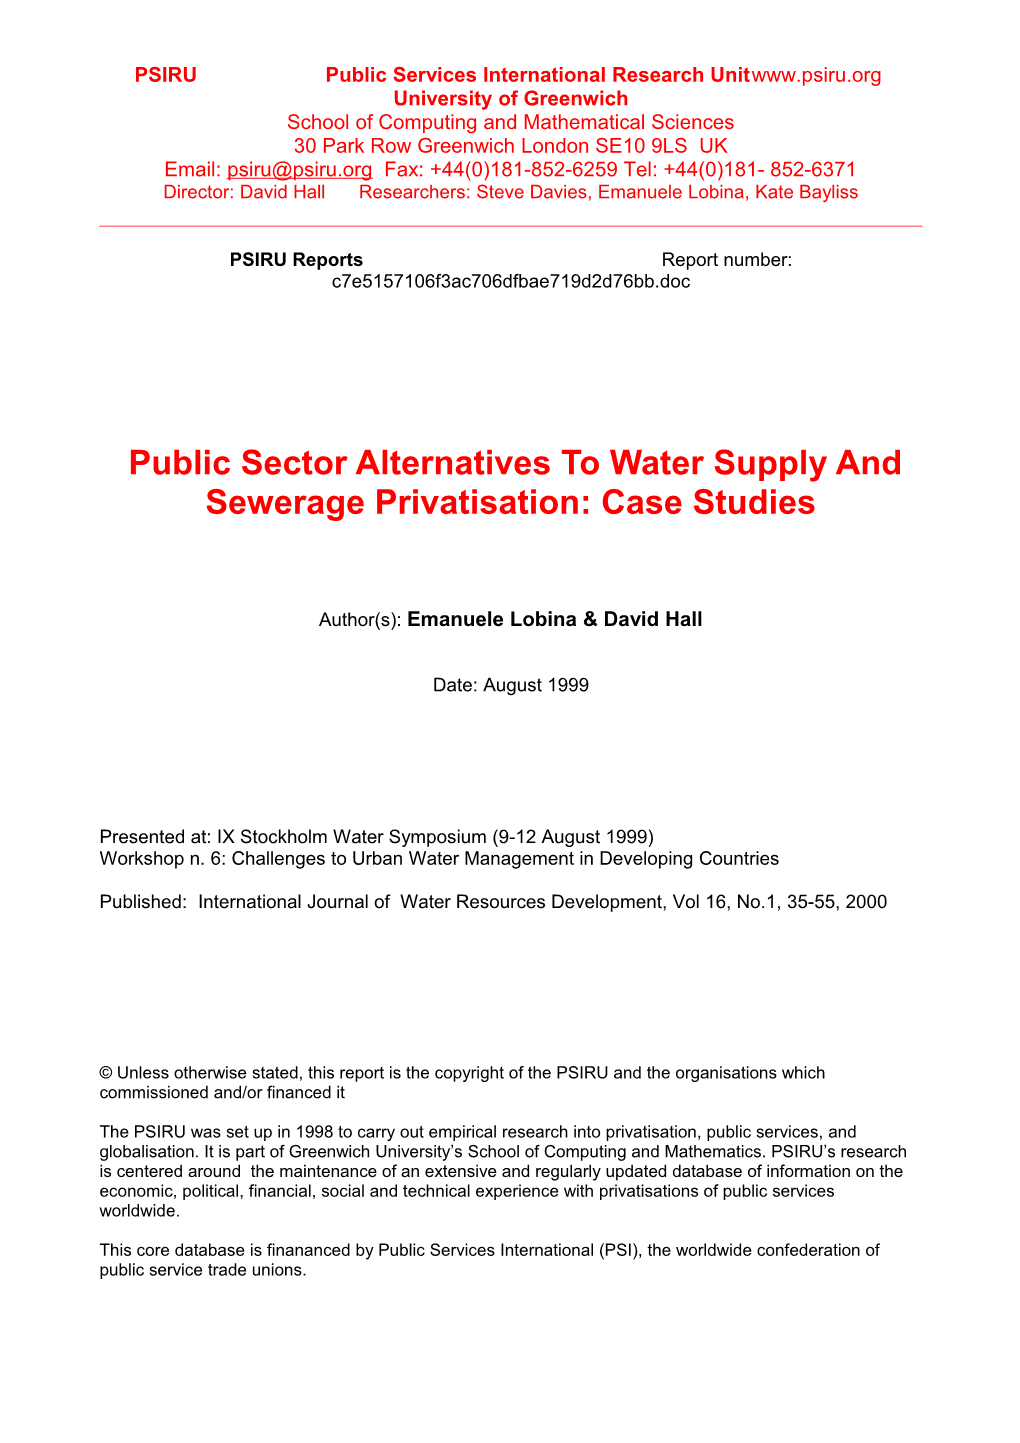 Public Sector Alternatives to Water Supply and Sewerage Privatisation: Case Studies